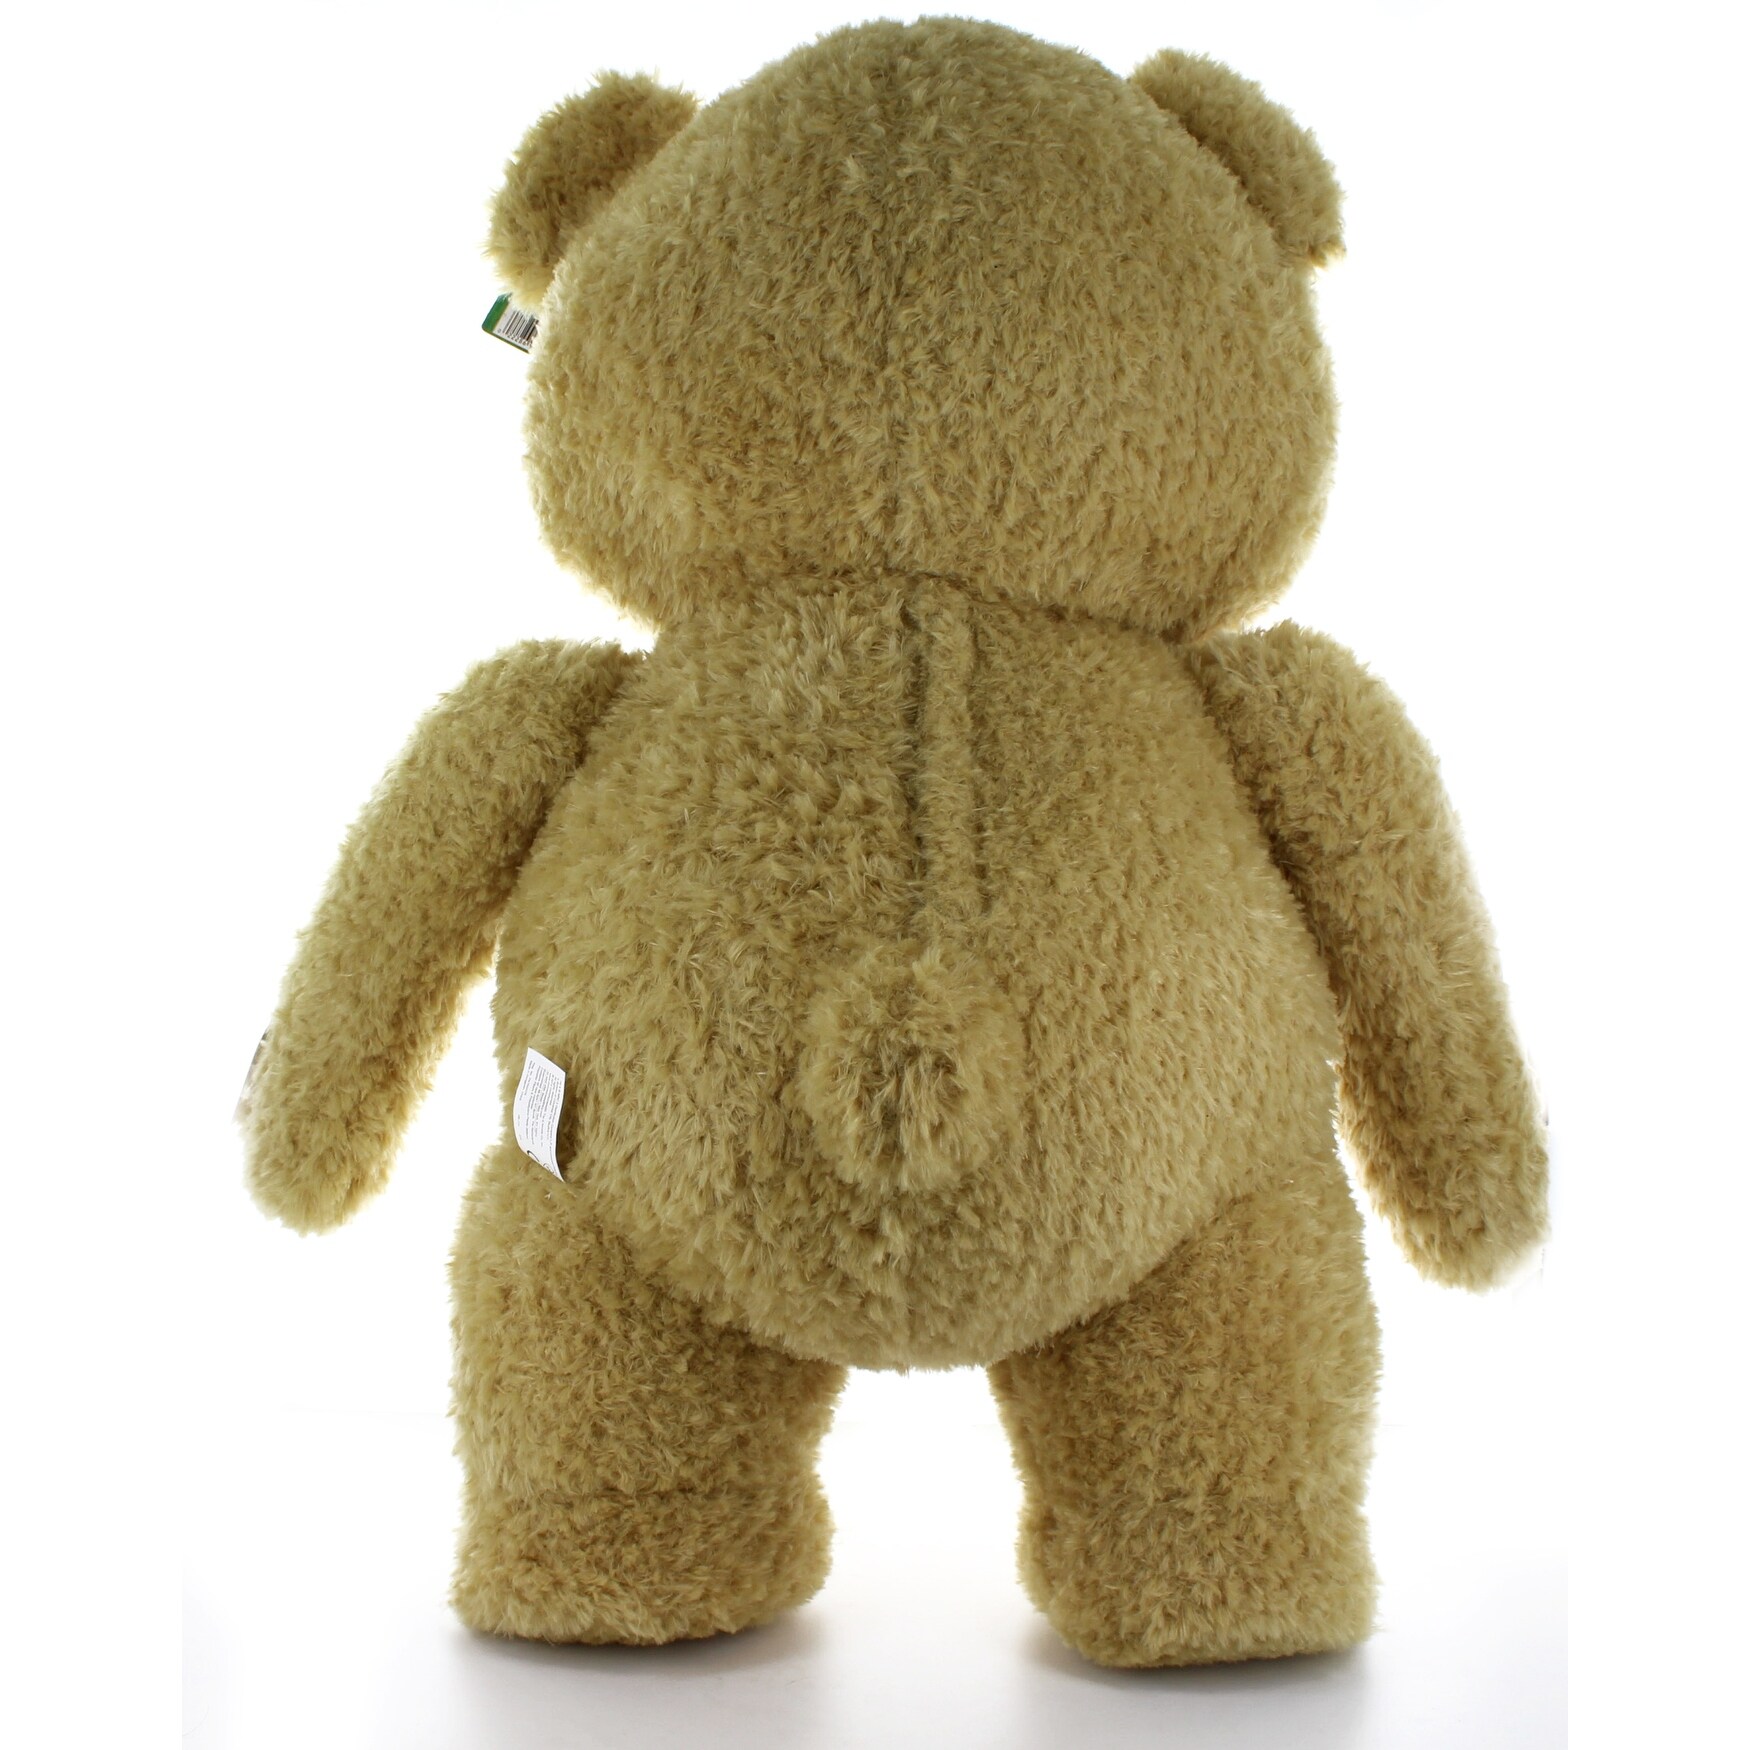 NEW Ted plush figures different set of 2 for adults 20 cm speaks sentences